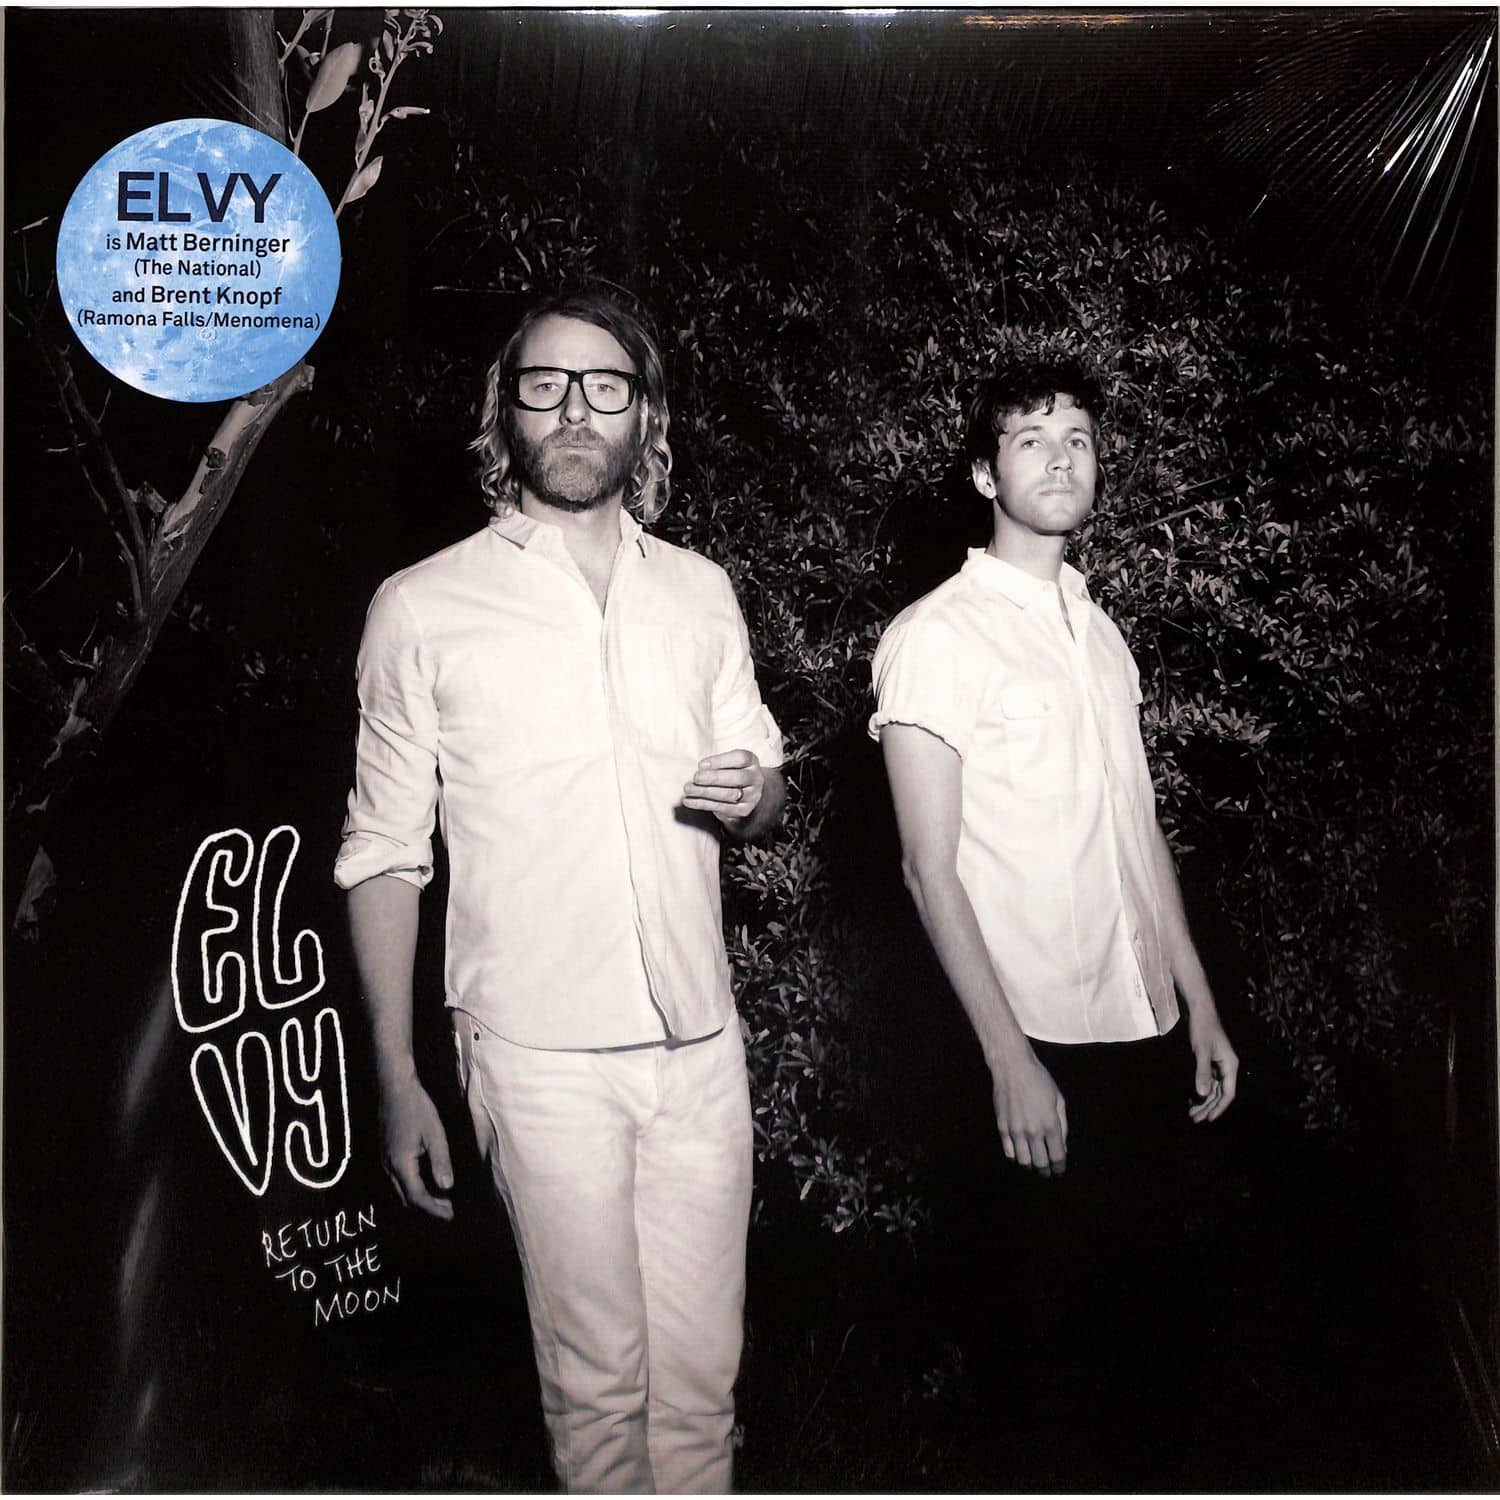 El Vy - RETURN TO THE MOON 